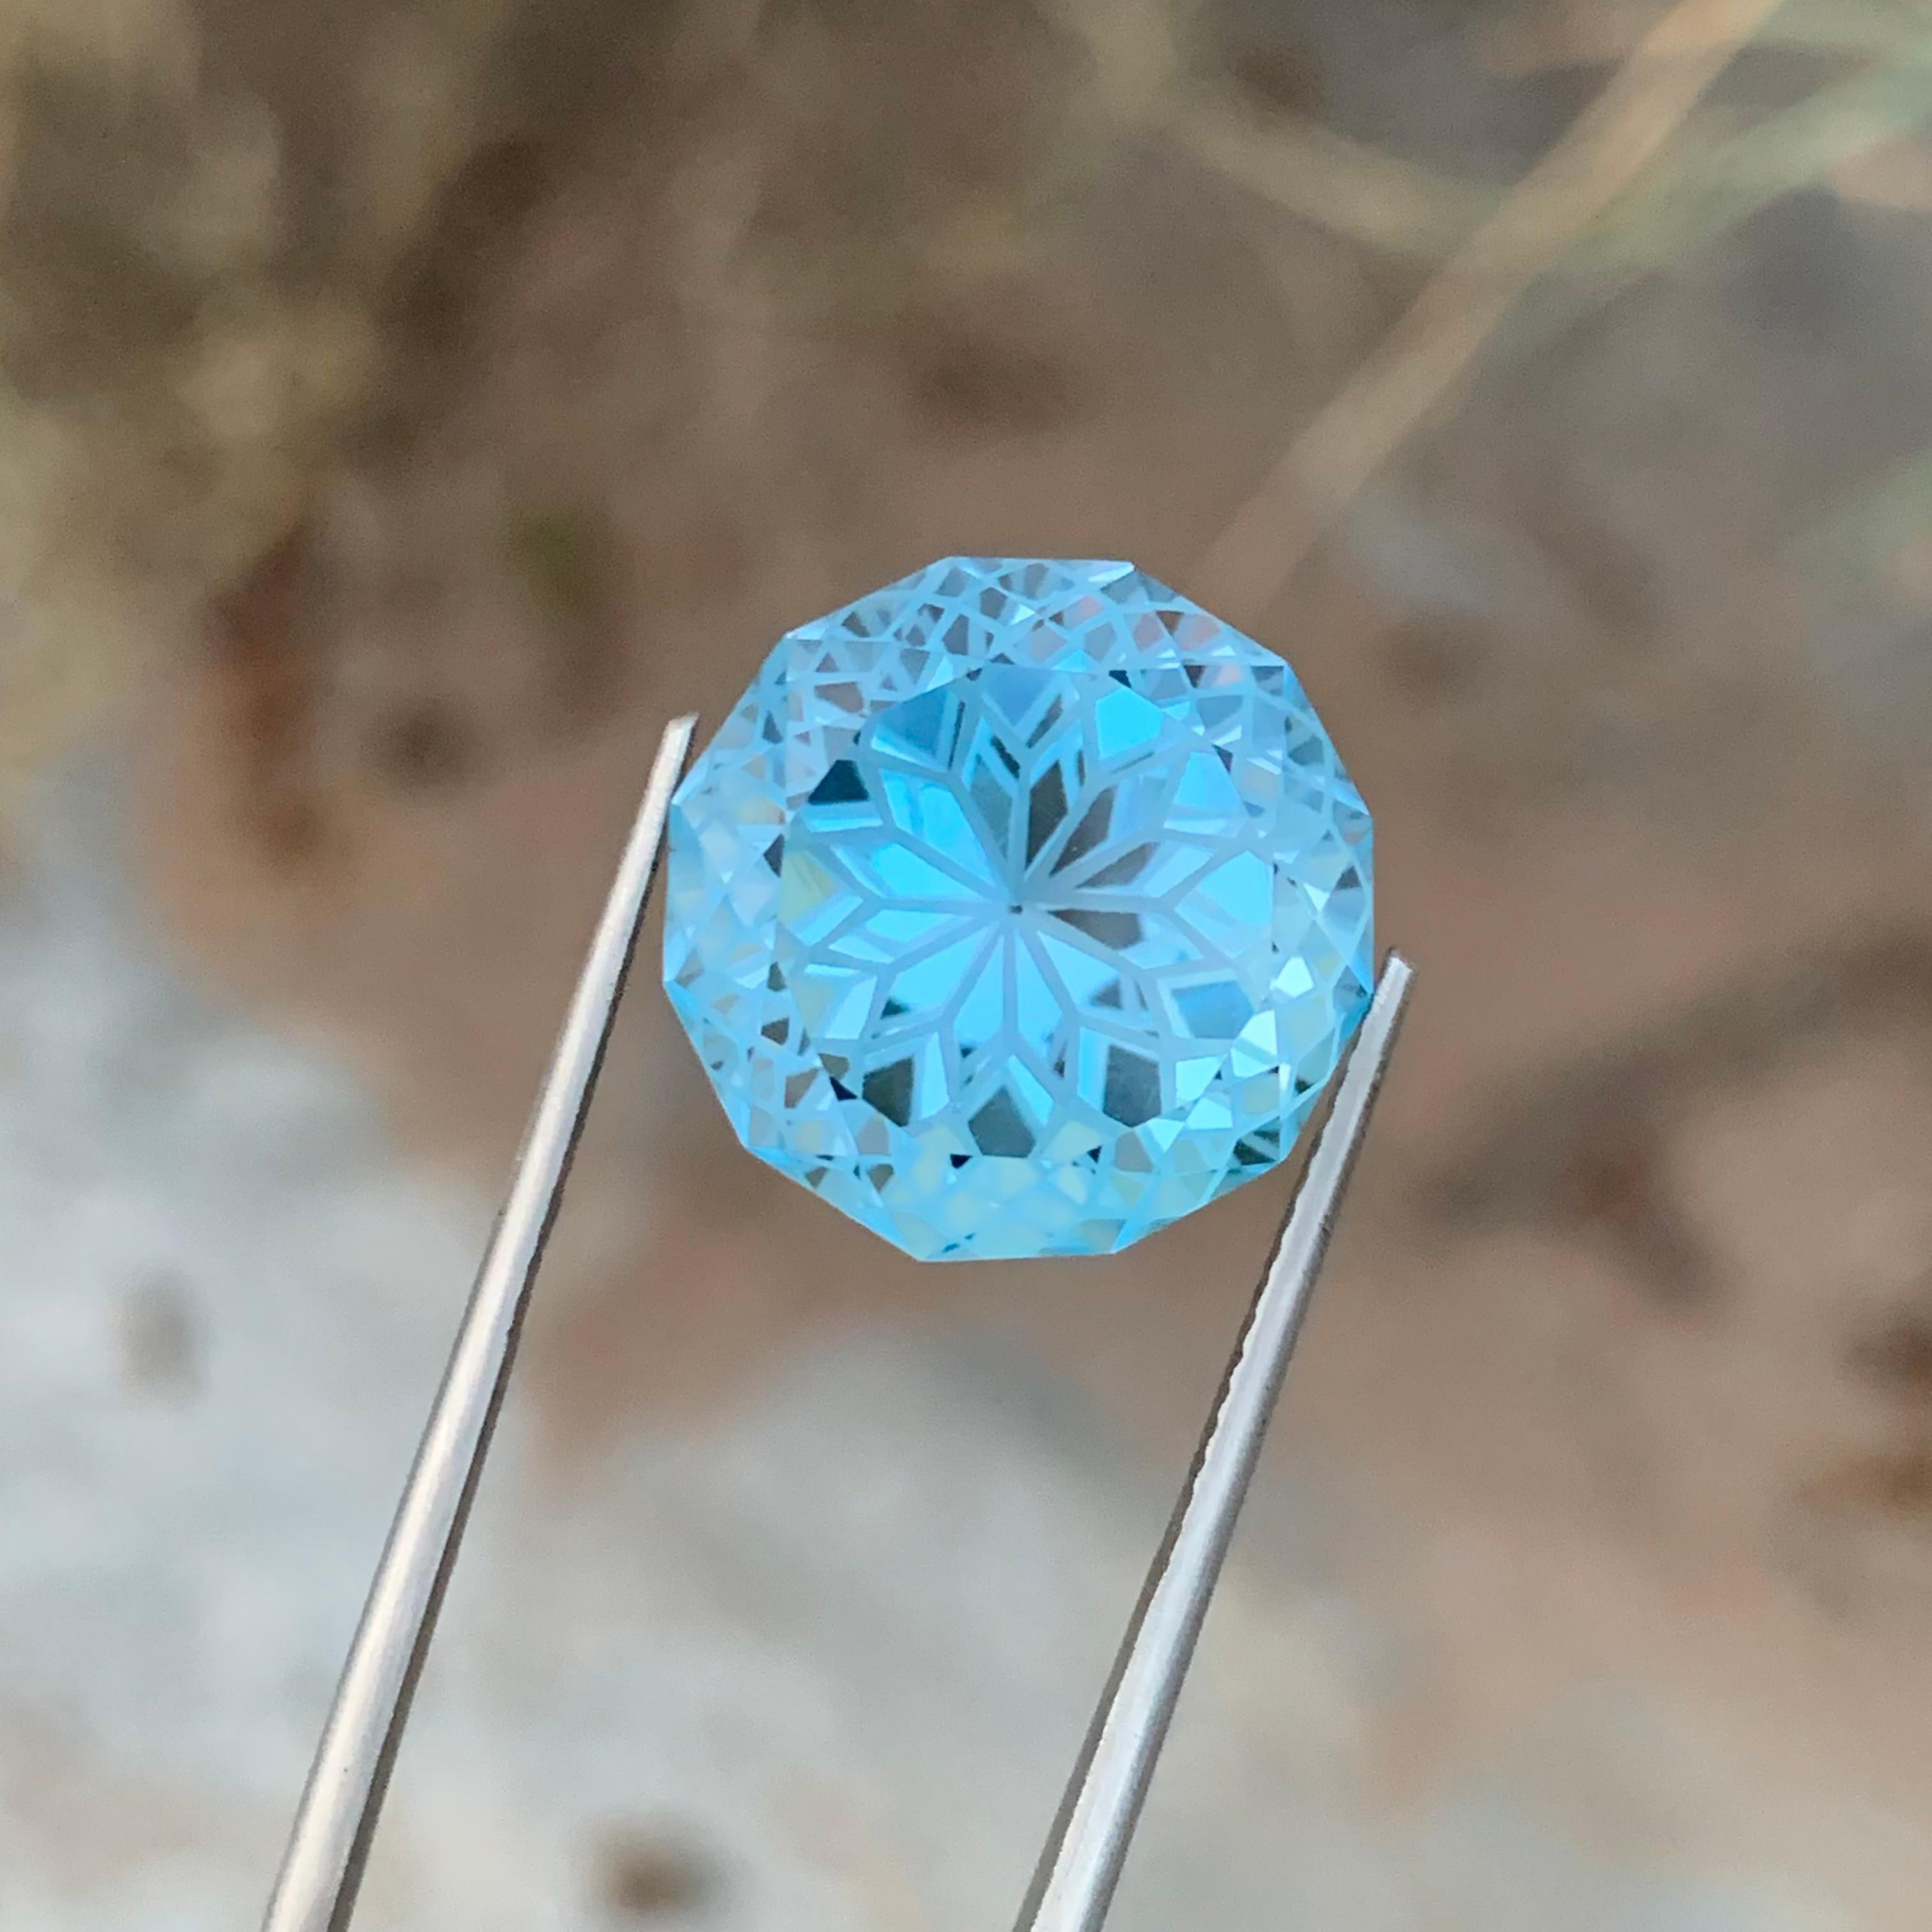 Captivating 19.65 Carats of Round Flower Cut Blue Topaz Gemstone Jewelry Making For Sale 7